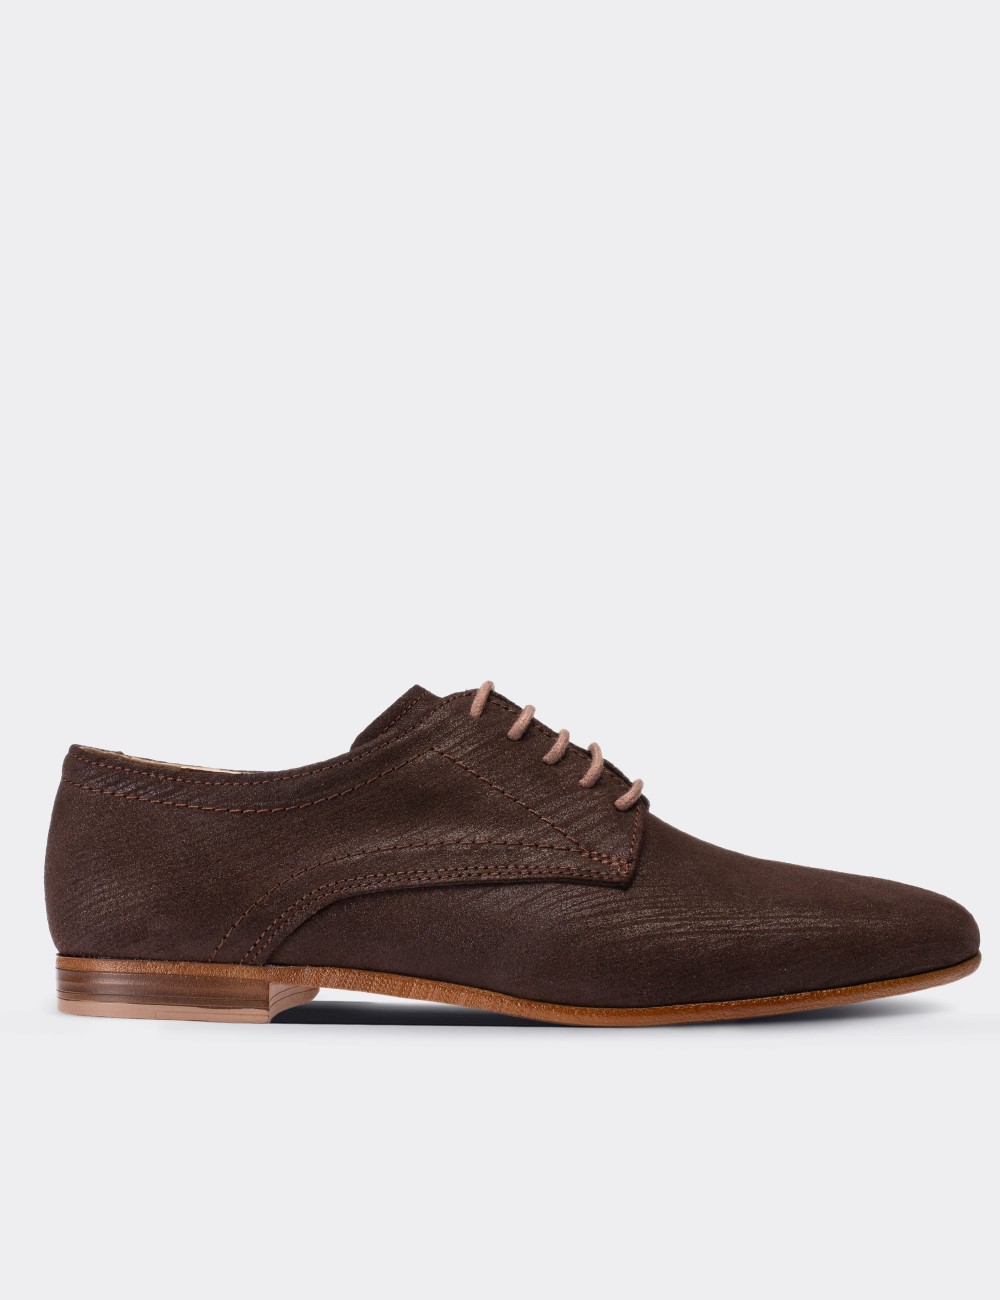 Brown Nubuck Leather Lace-up Shoes - 01430ZKHVC01